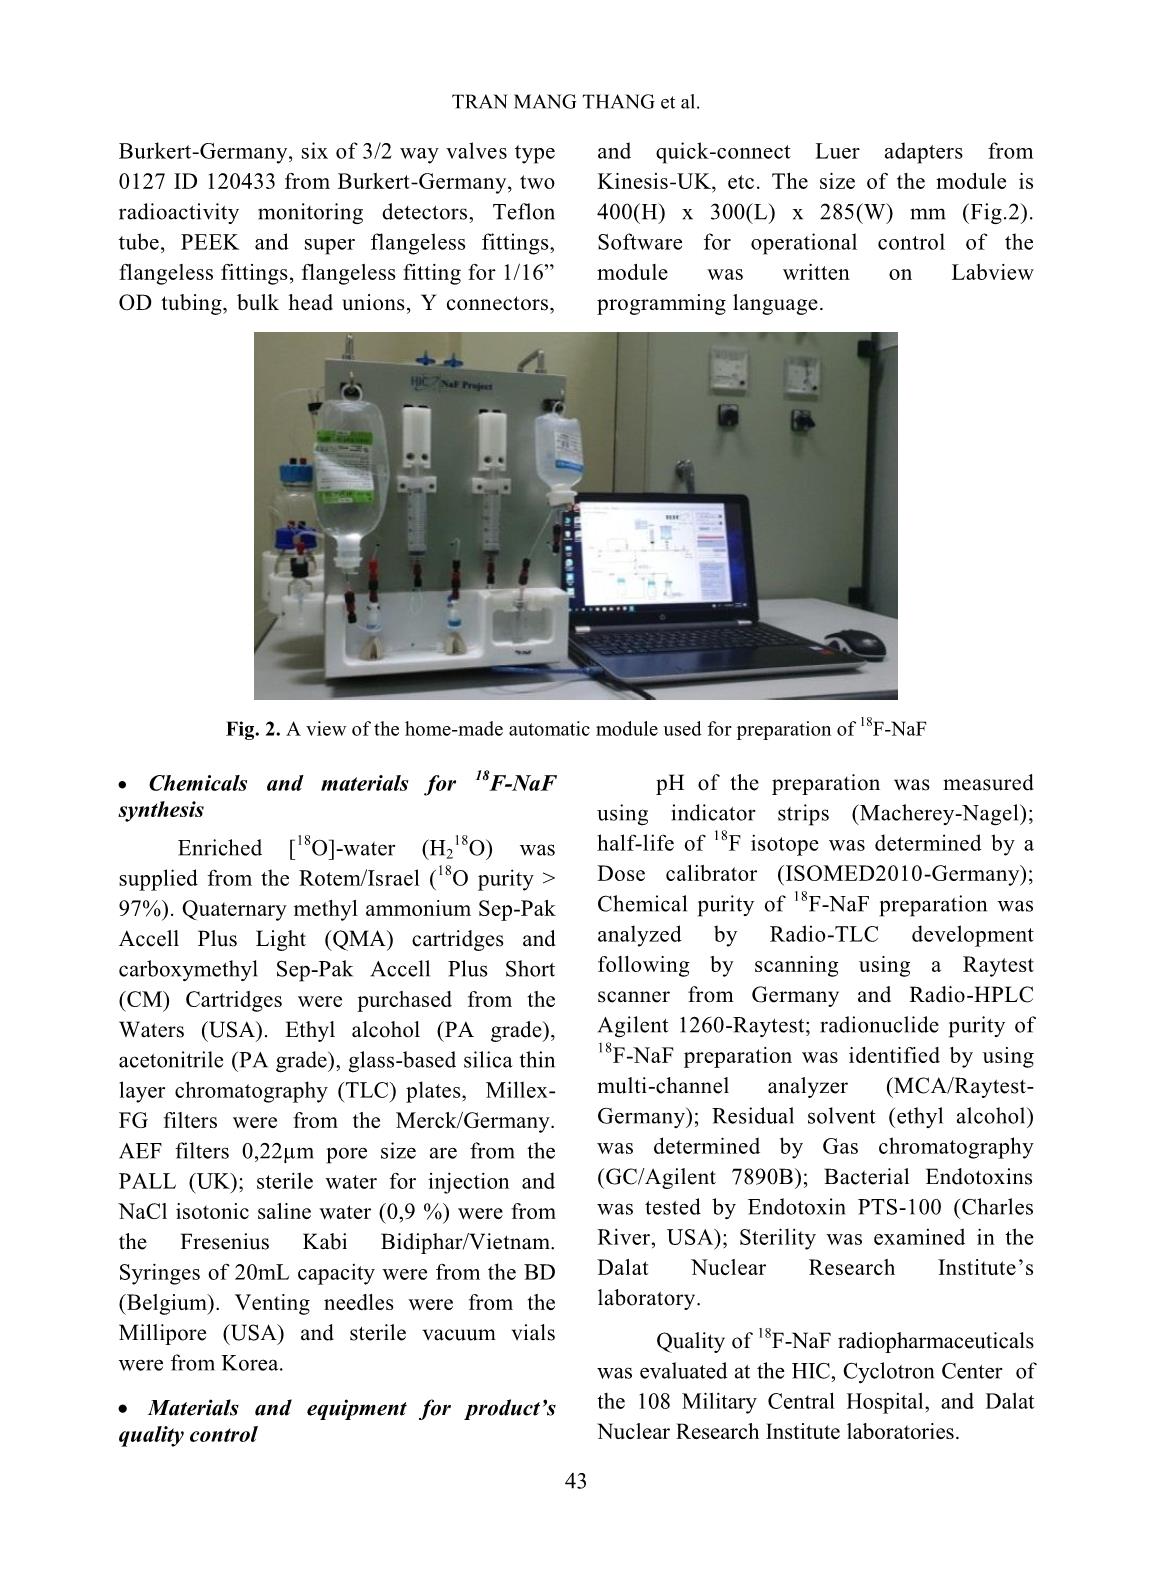 Preparation of ¹⁸F-NaF radiopharmaceuticals using home-made automatic synthesis module at Hanoi Irradiation Center trang 3